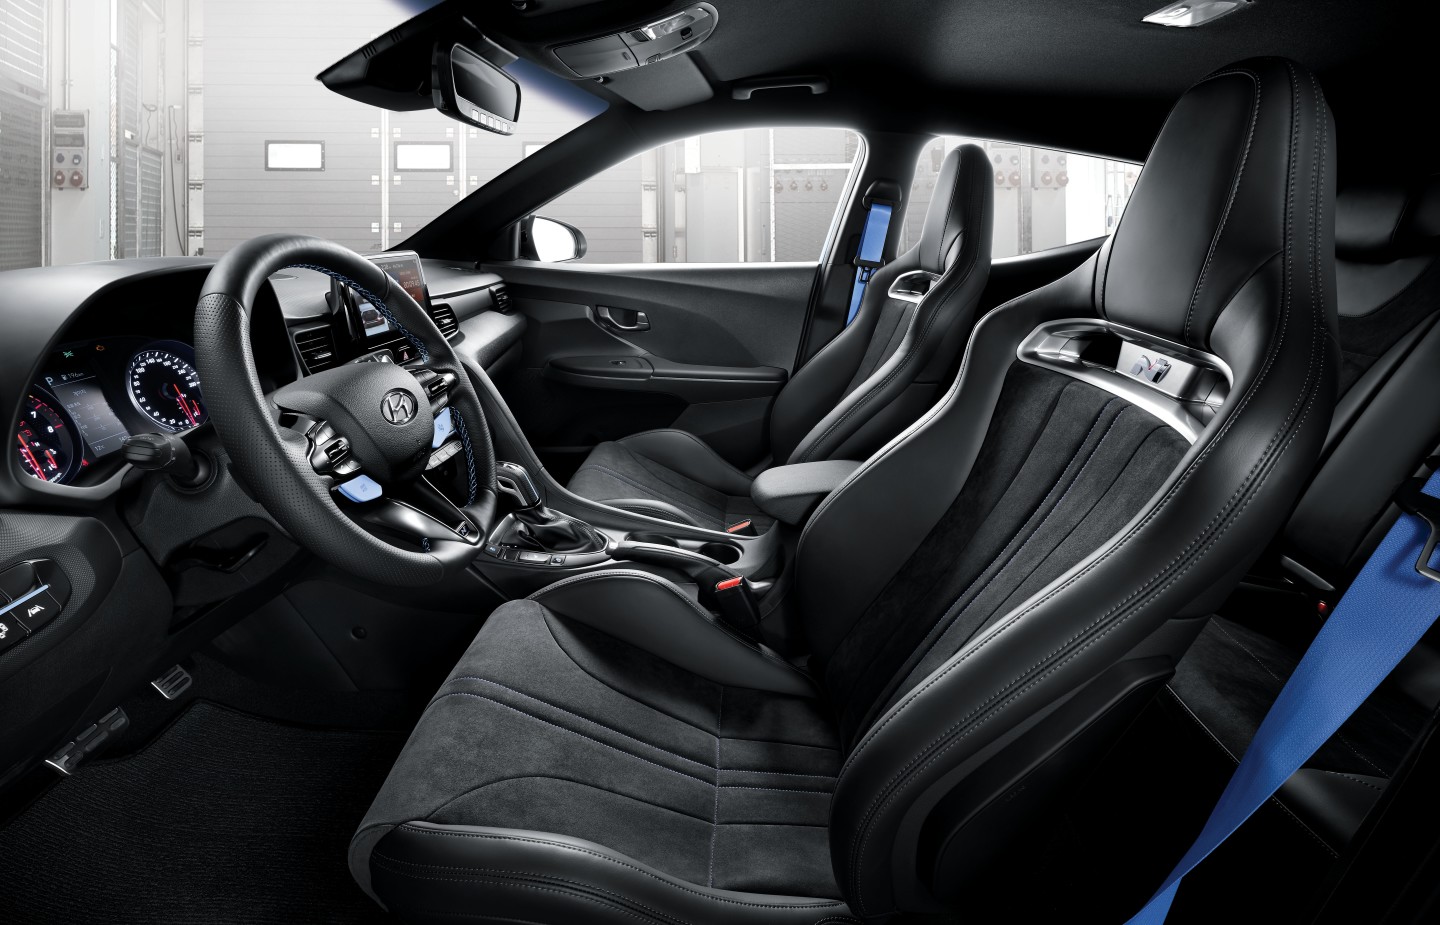 Lightweight bucket seats covered in Alcantara are a neat new option